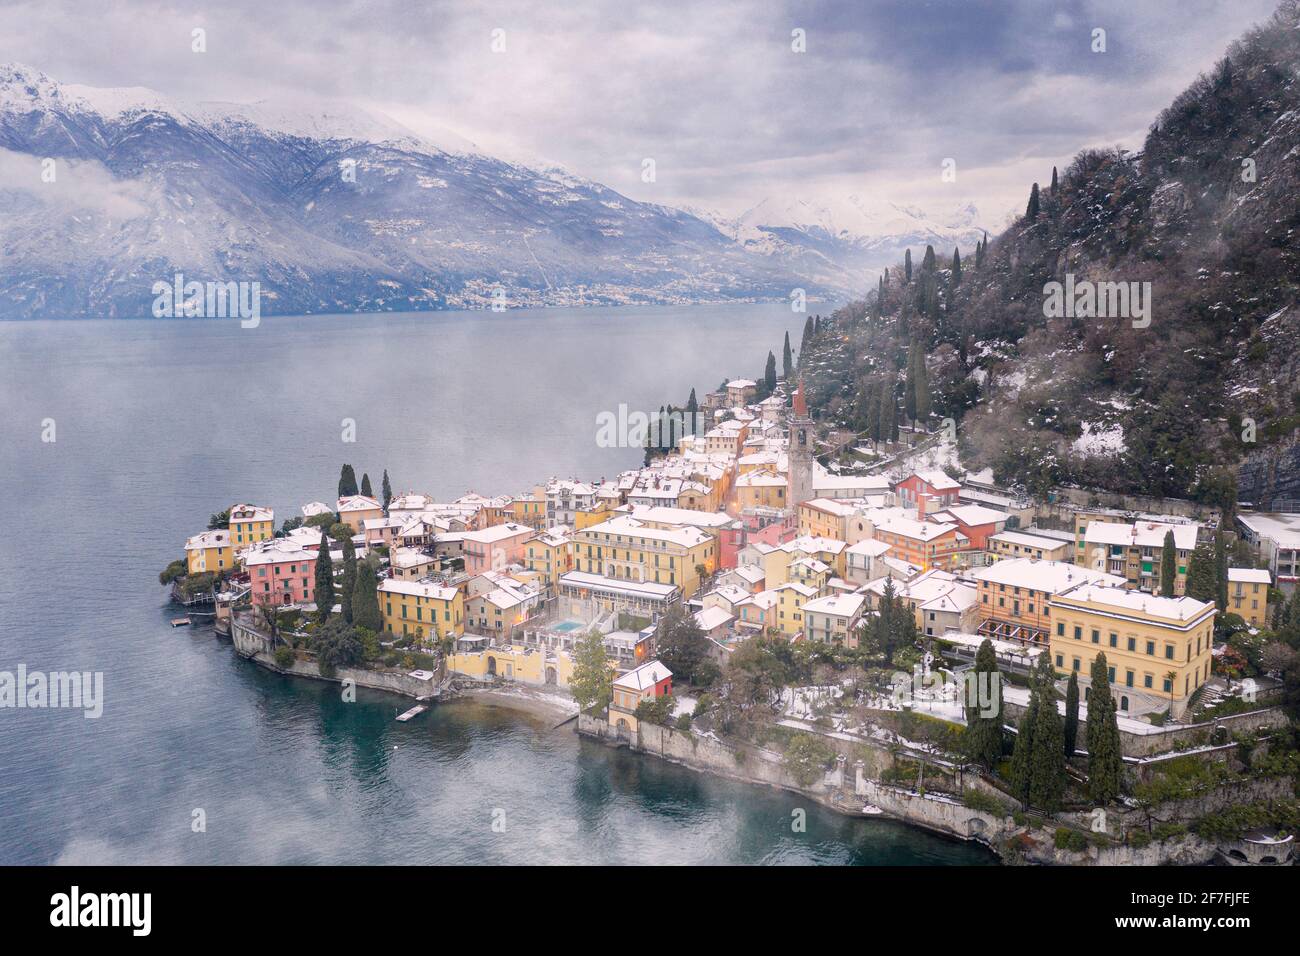 Traditional houses of Varenna old town after a snowfall, Lake Como, Lecco province, Lombardy, Italian Lakes, Italy, Europe Stock Photo